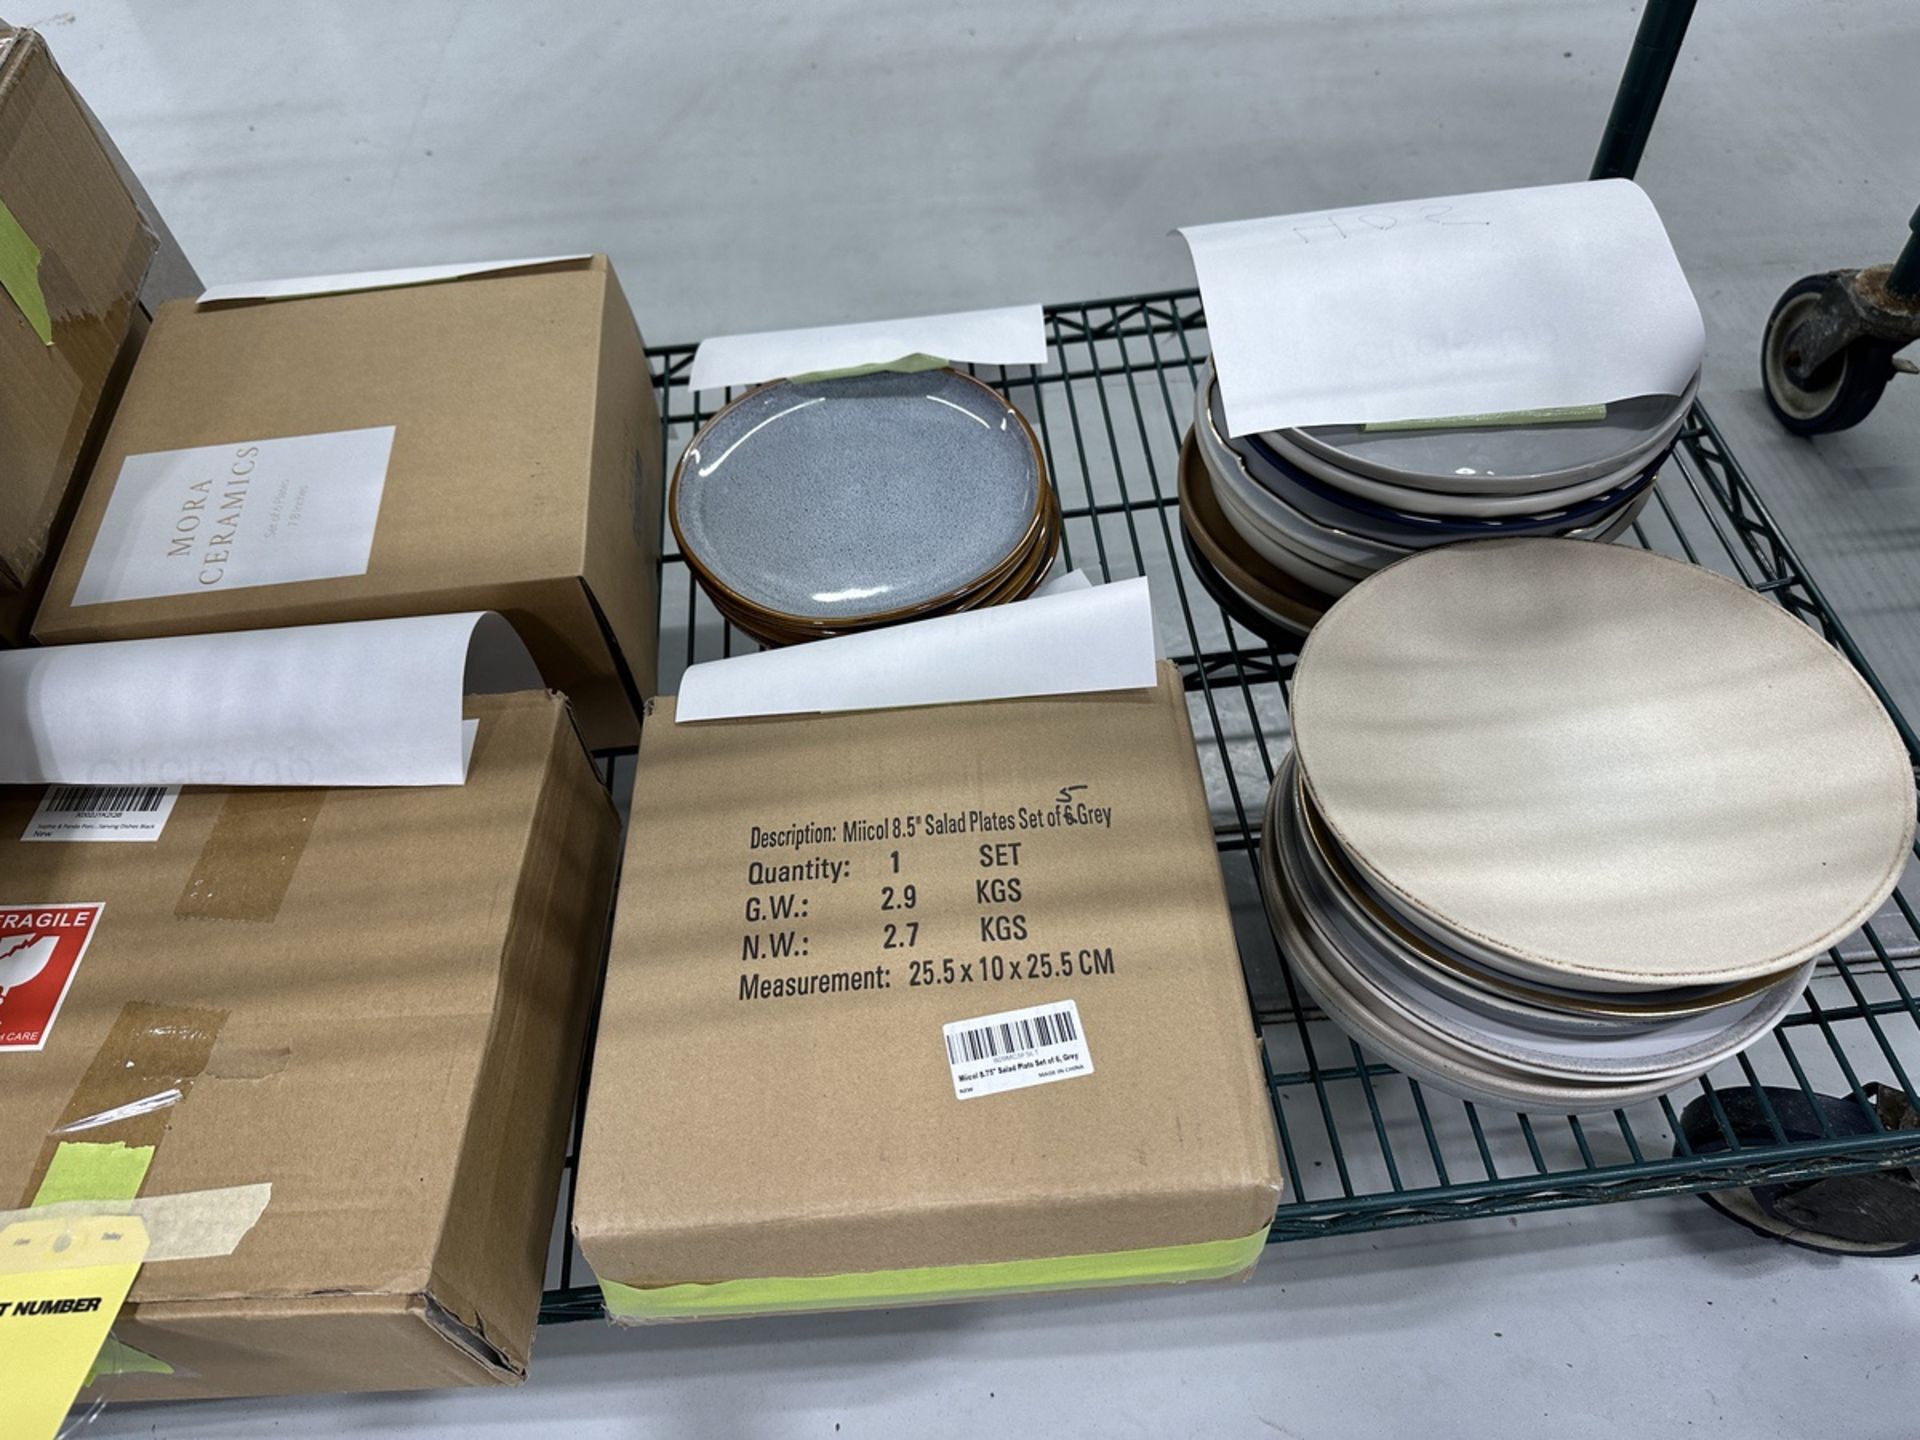 LOT Asst. Marble Lazy Susans, Cutting Trays, Bowls, Porcelain Plates on (2) Shelves | Rig Fee $75 - Image 5 of 5